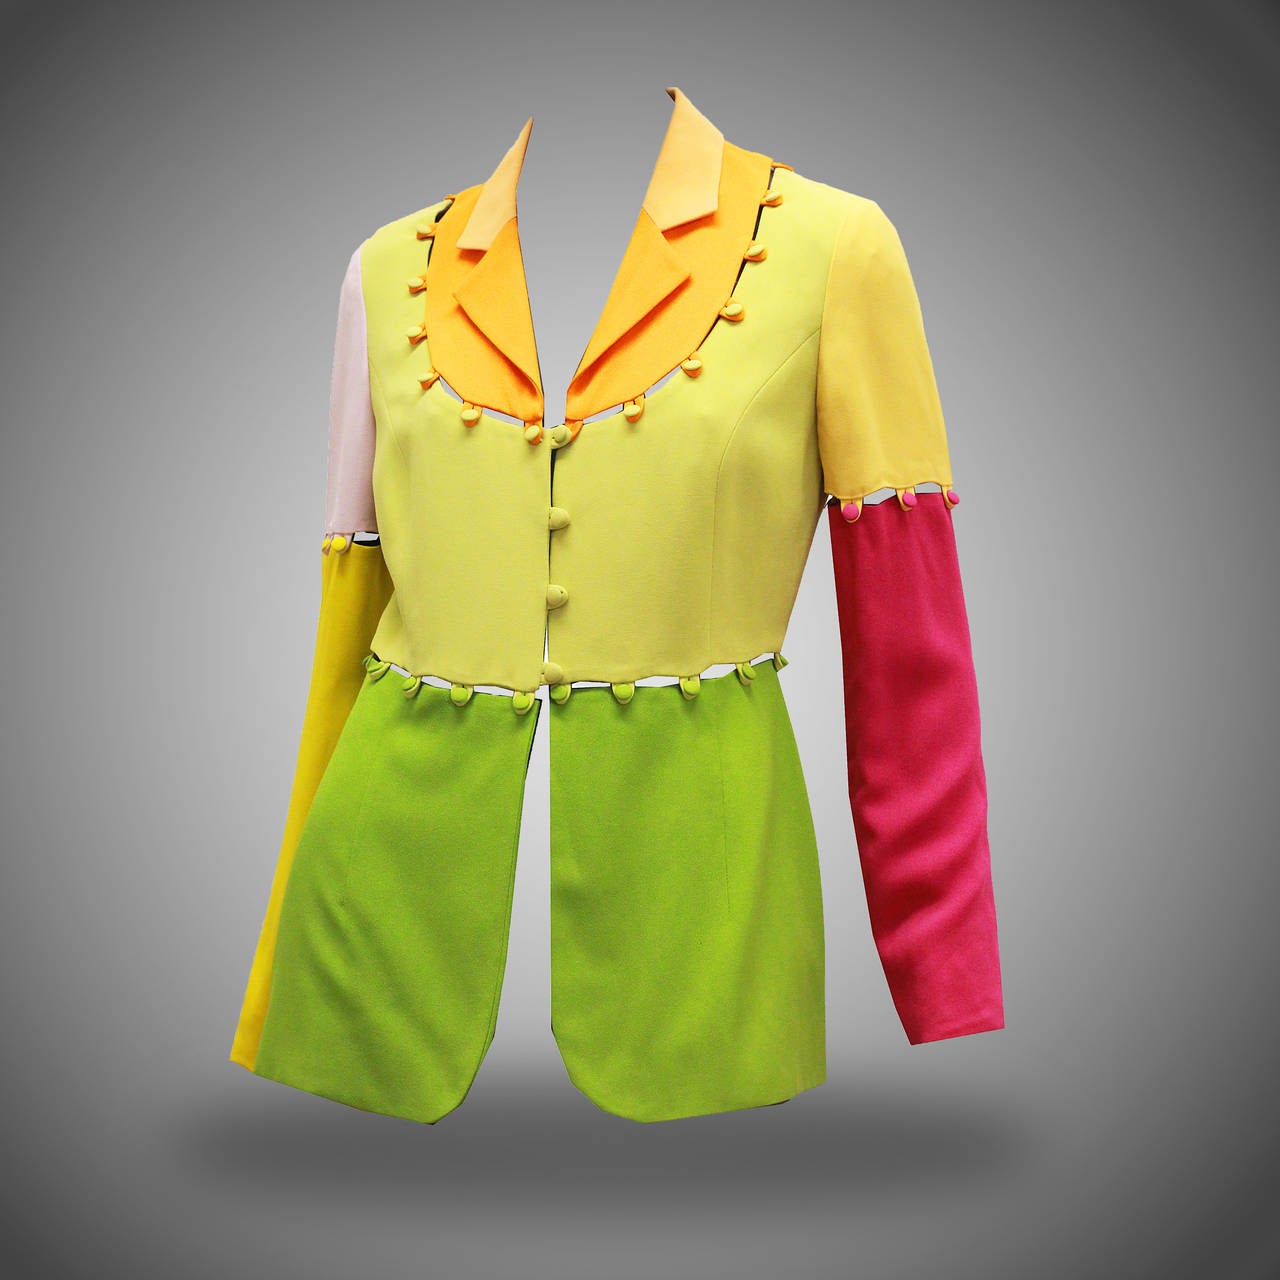 A Moschino puzzle blazer/jacket features colour block design. The beauty about this jacket is that you can adjust it to fit the occasion, the design allows the wearer to make the jacket sleeveless, have no collar or even make the jacket cropped.